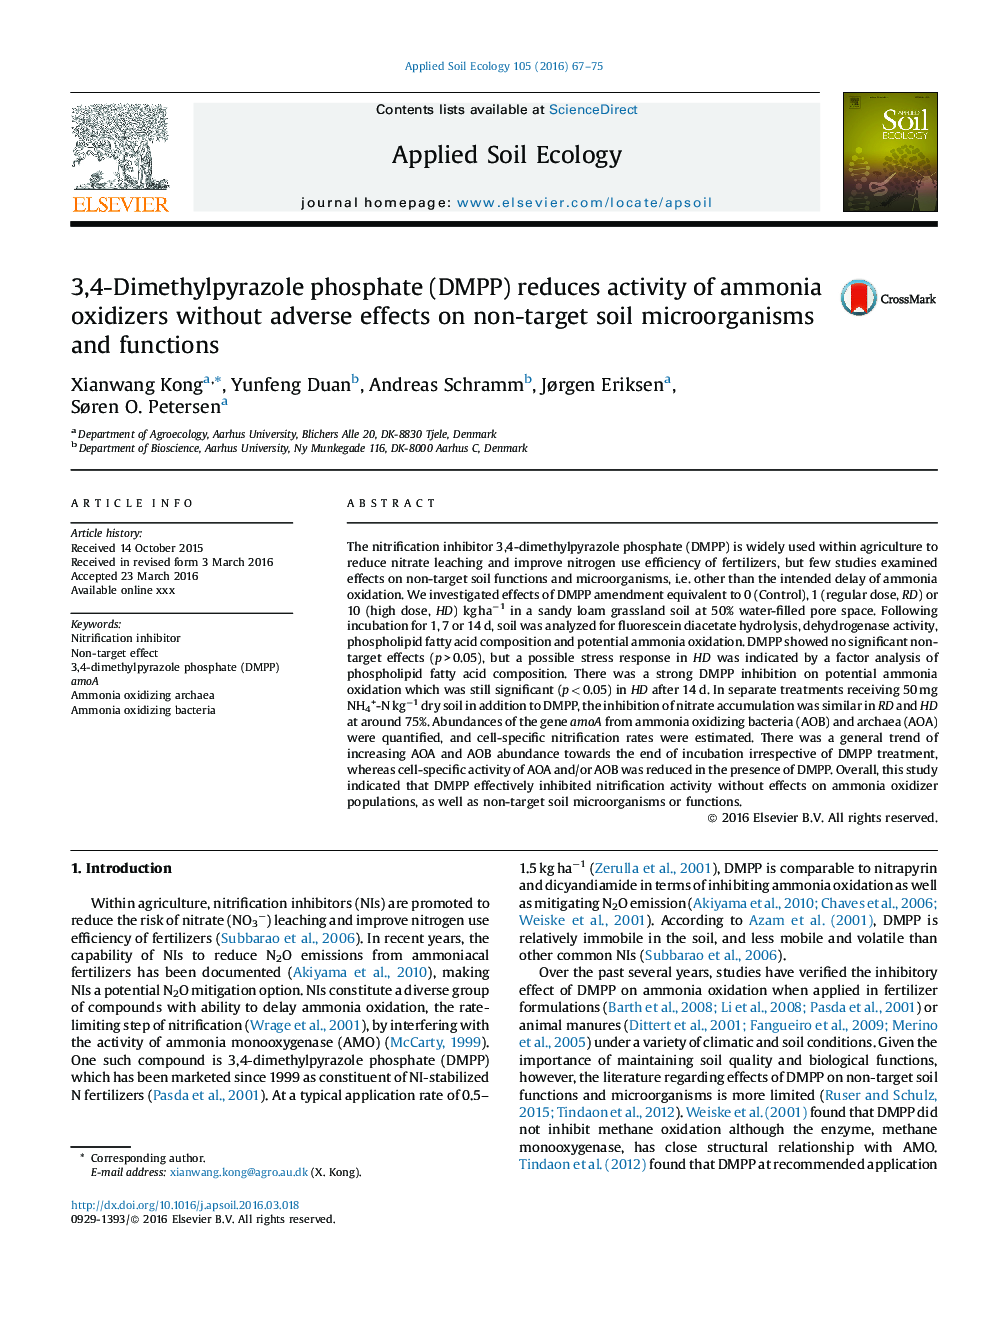 3,4-Dimethylpyrazole phosphate (DMPP) reduces activity of ammonia oxidizers without adverse effects on non-target soil microorganisms and functions